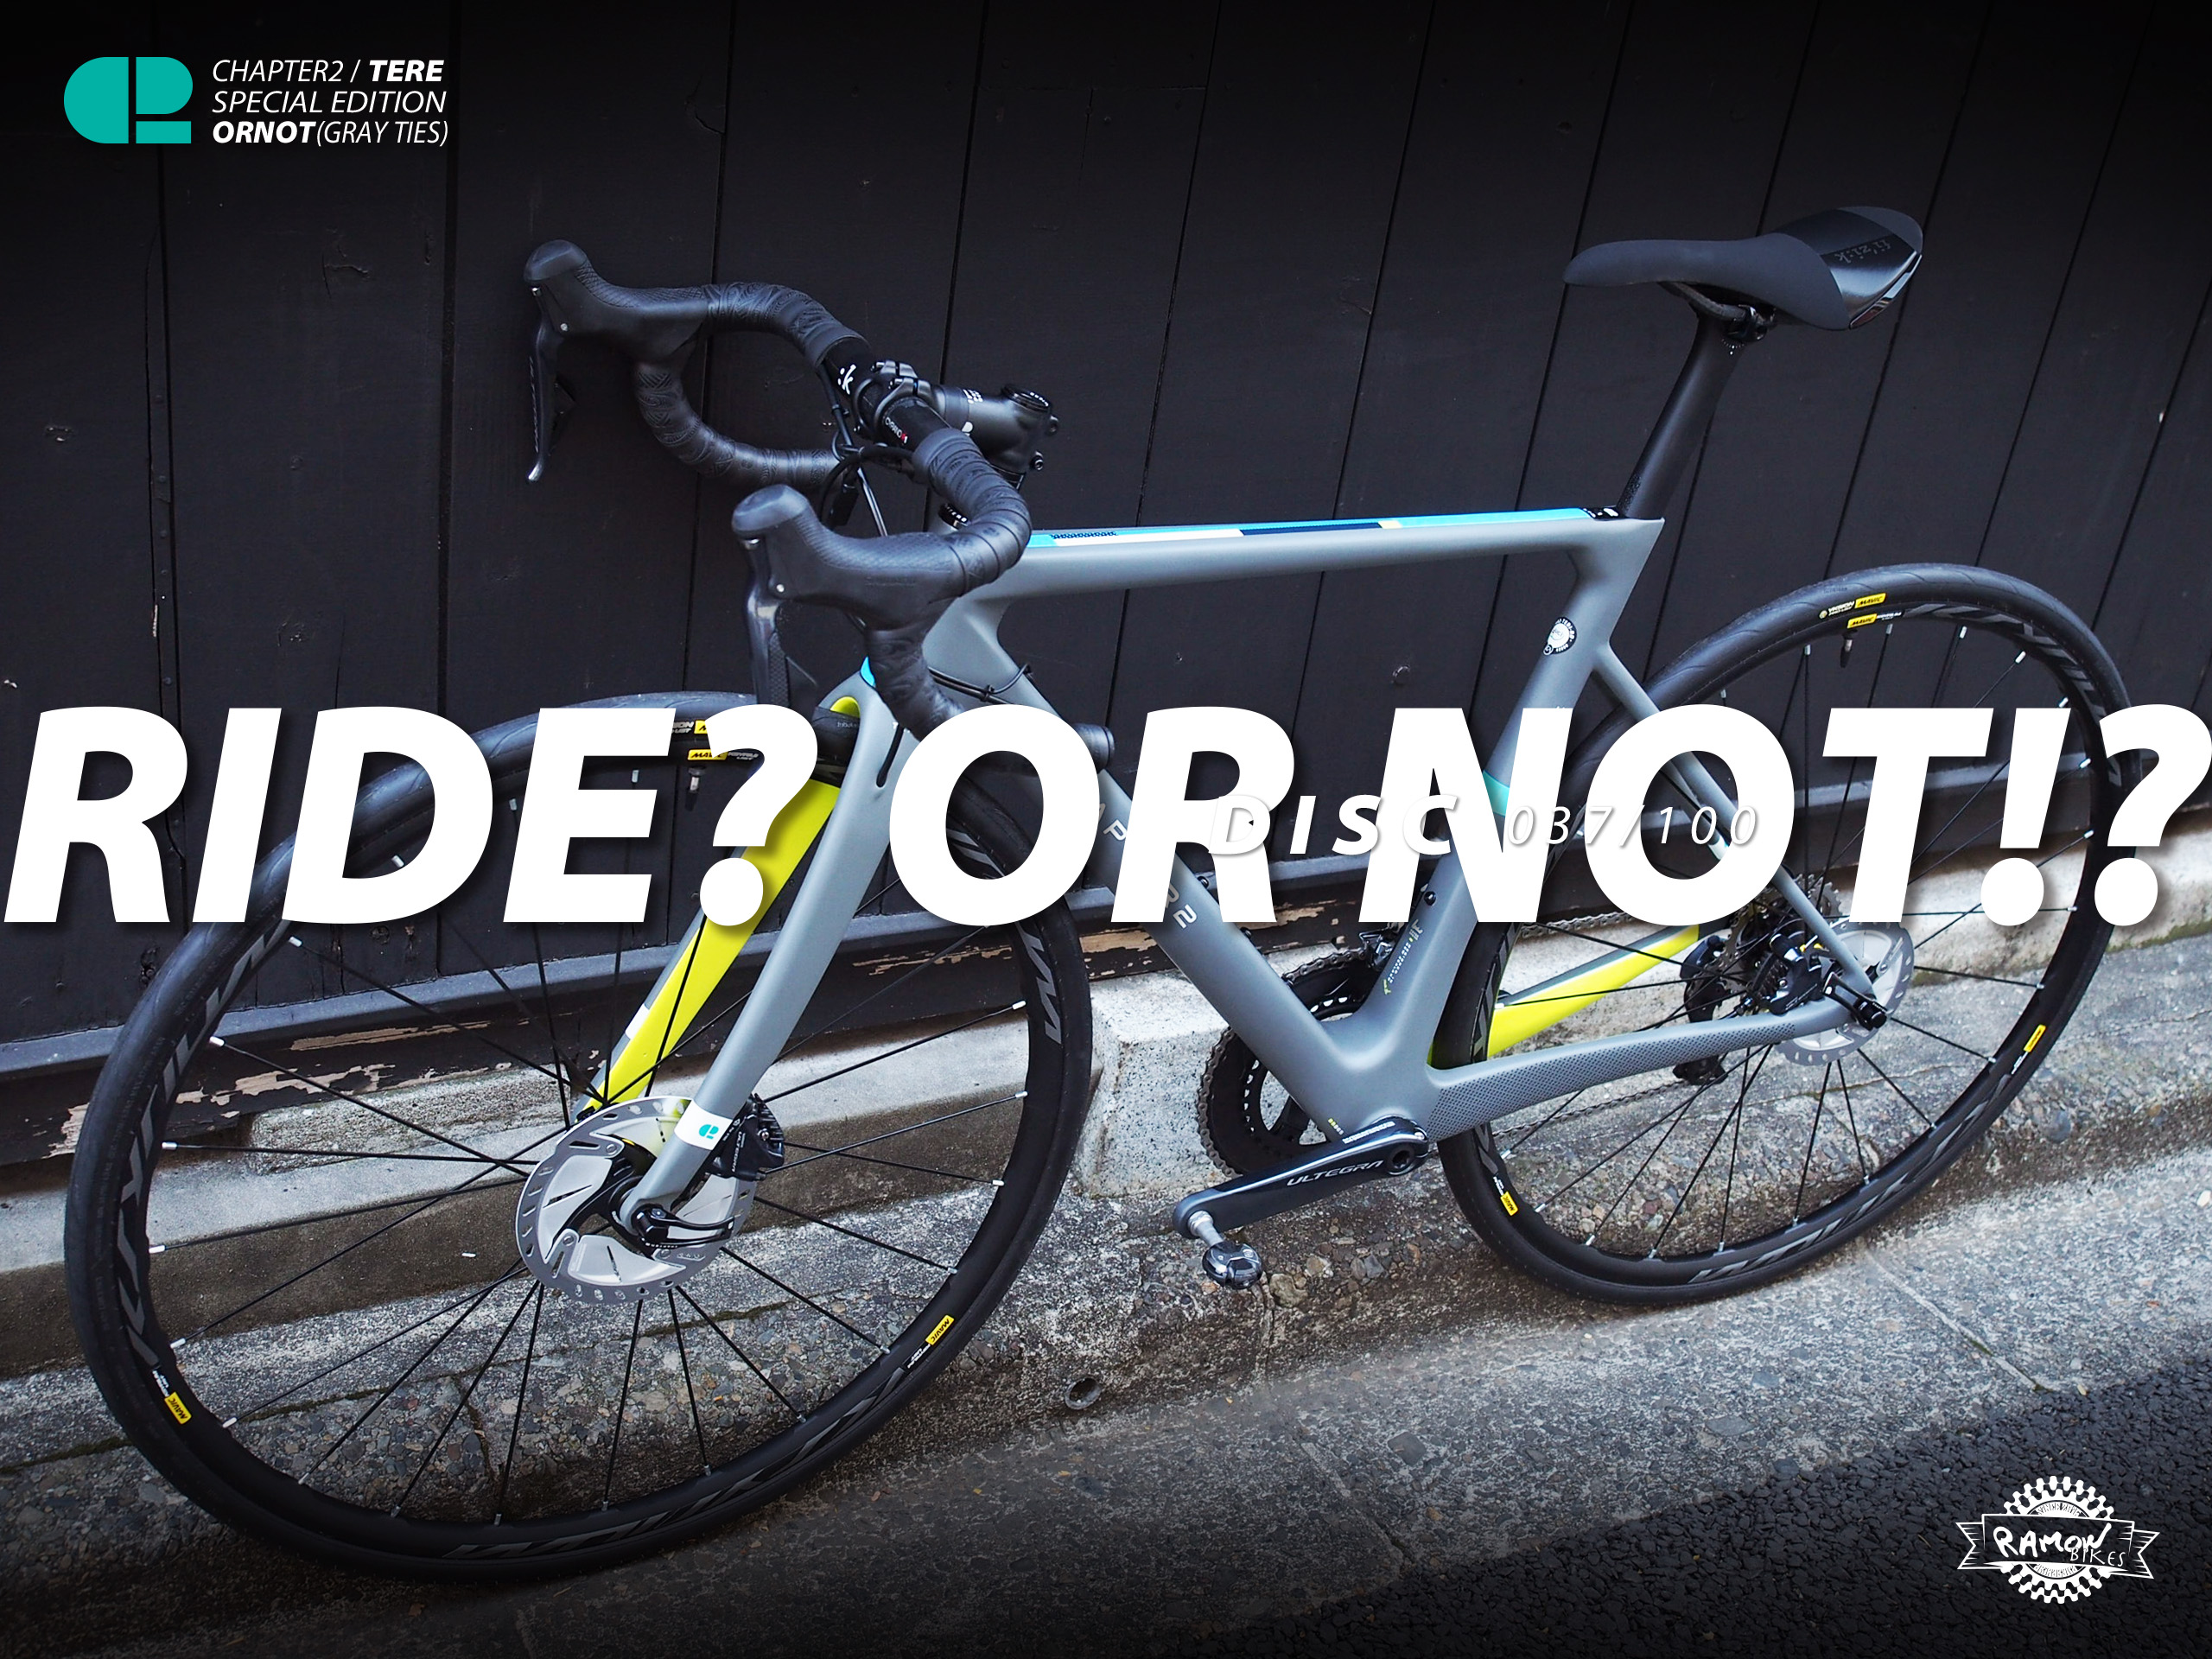 RIDE? ornot!? / Chapter2 TERE (Disc-Brake) SPECIAL EDITION “ORNOT 